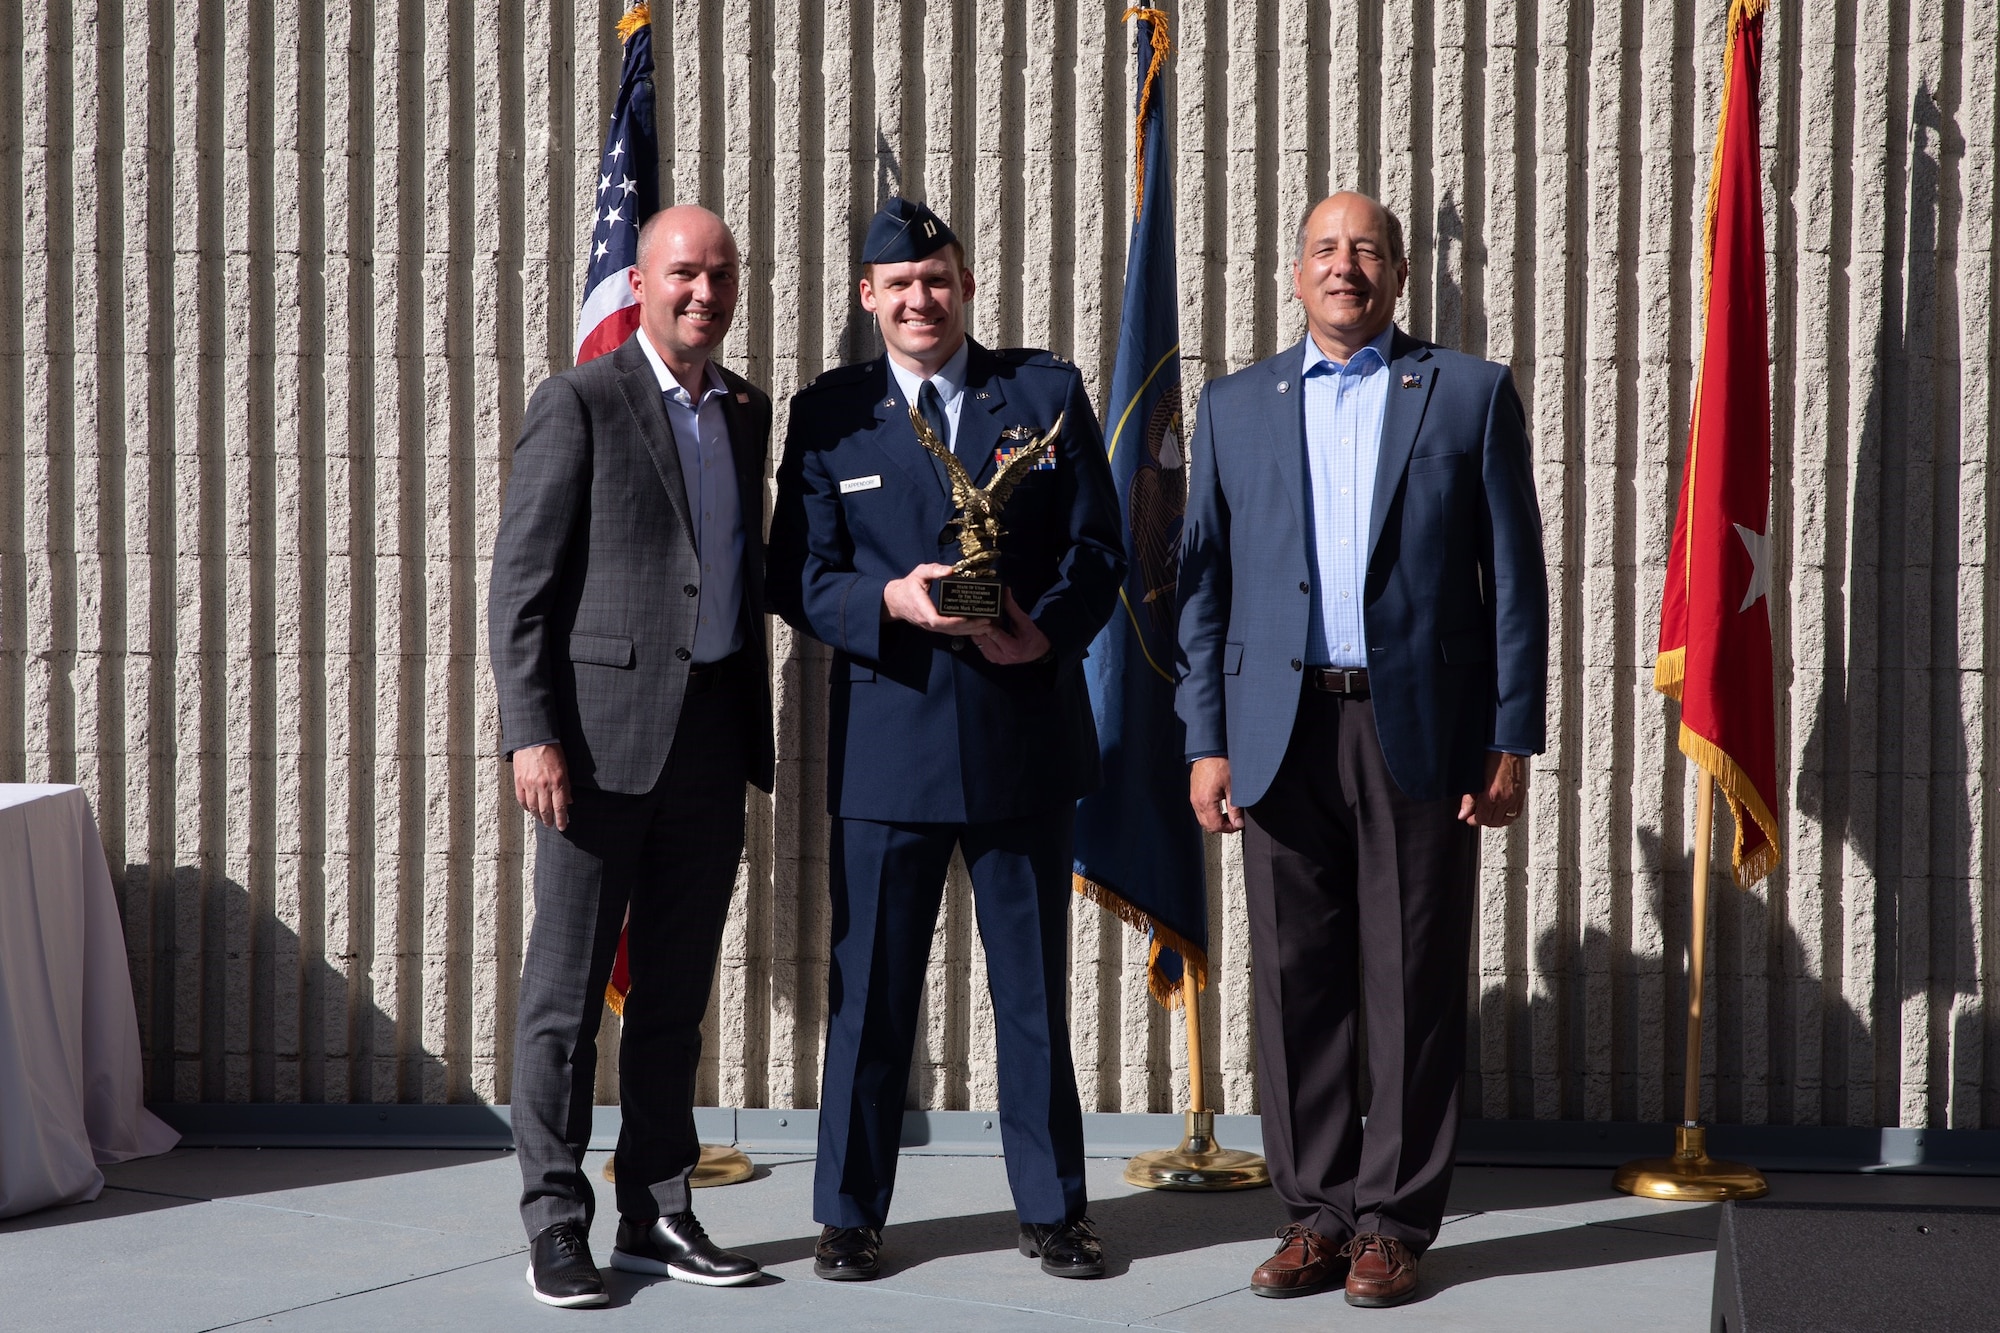 Capt. Mark Tappendorf, reservist in the 419th Fighter Wing, accepts Utah's Company Grade Officer of the Year award from Gov Spencer Cox and Gary Harter, executive director of Utah's Department of Veteran and Military Affairs during a ceremony May 15 in Murray, Utah.